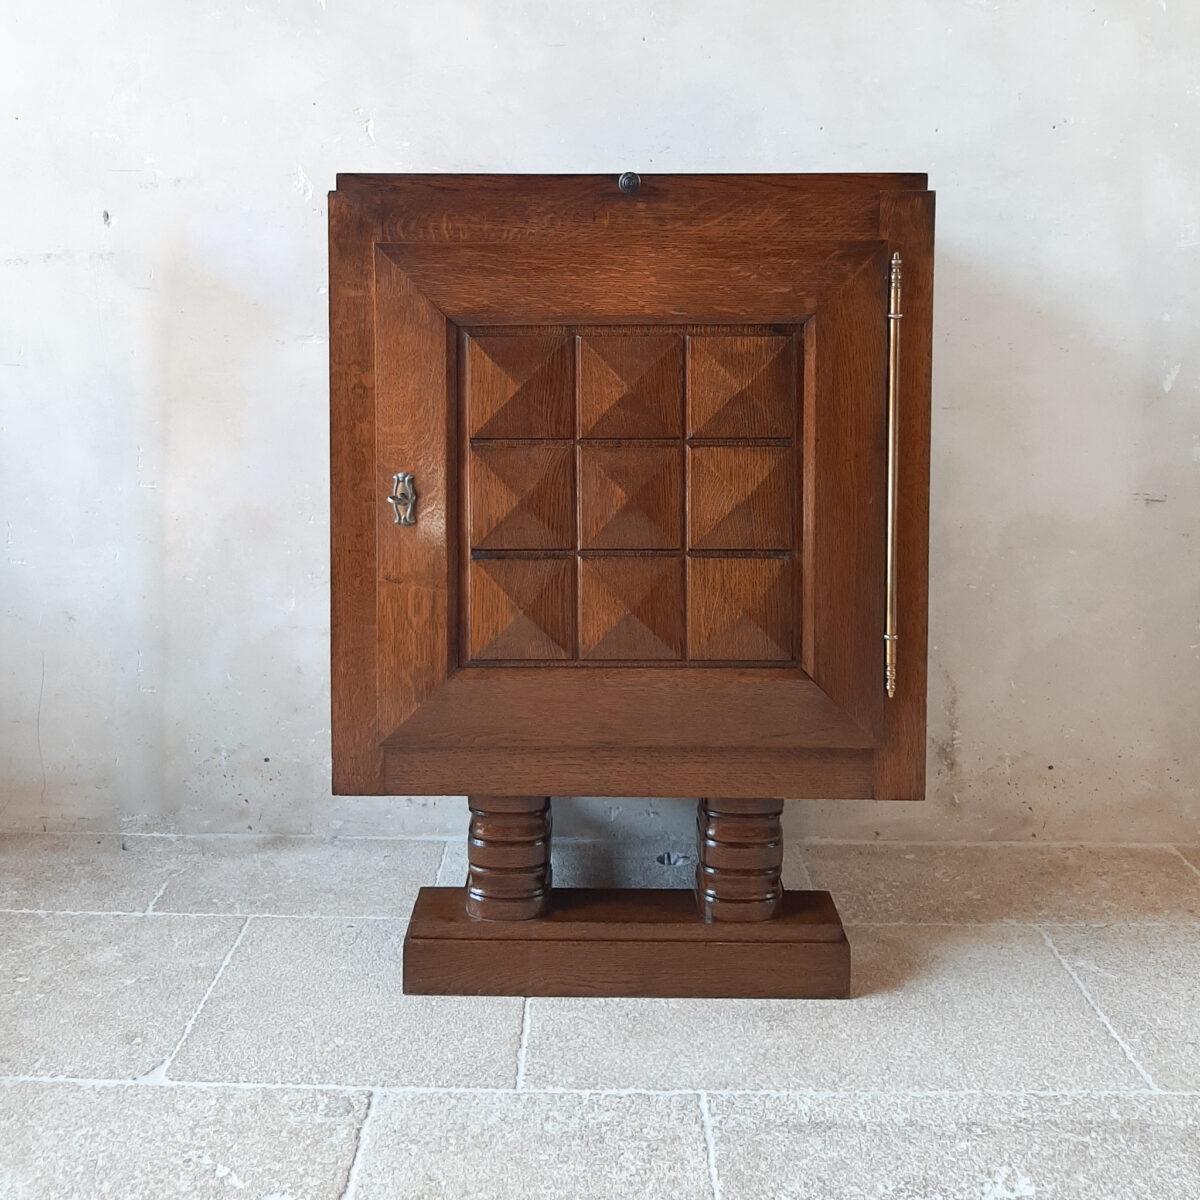 Midcentury vintage Charles Dudouyt wall cabinet. This Brutalist cupboard or bar cabinet in it's original darkened brown oak has geometrical, graphic details on the door, which is a signature relief seen often on Charles Dudouyt work and shows its